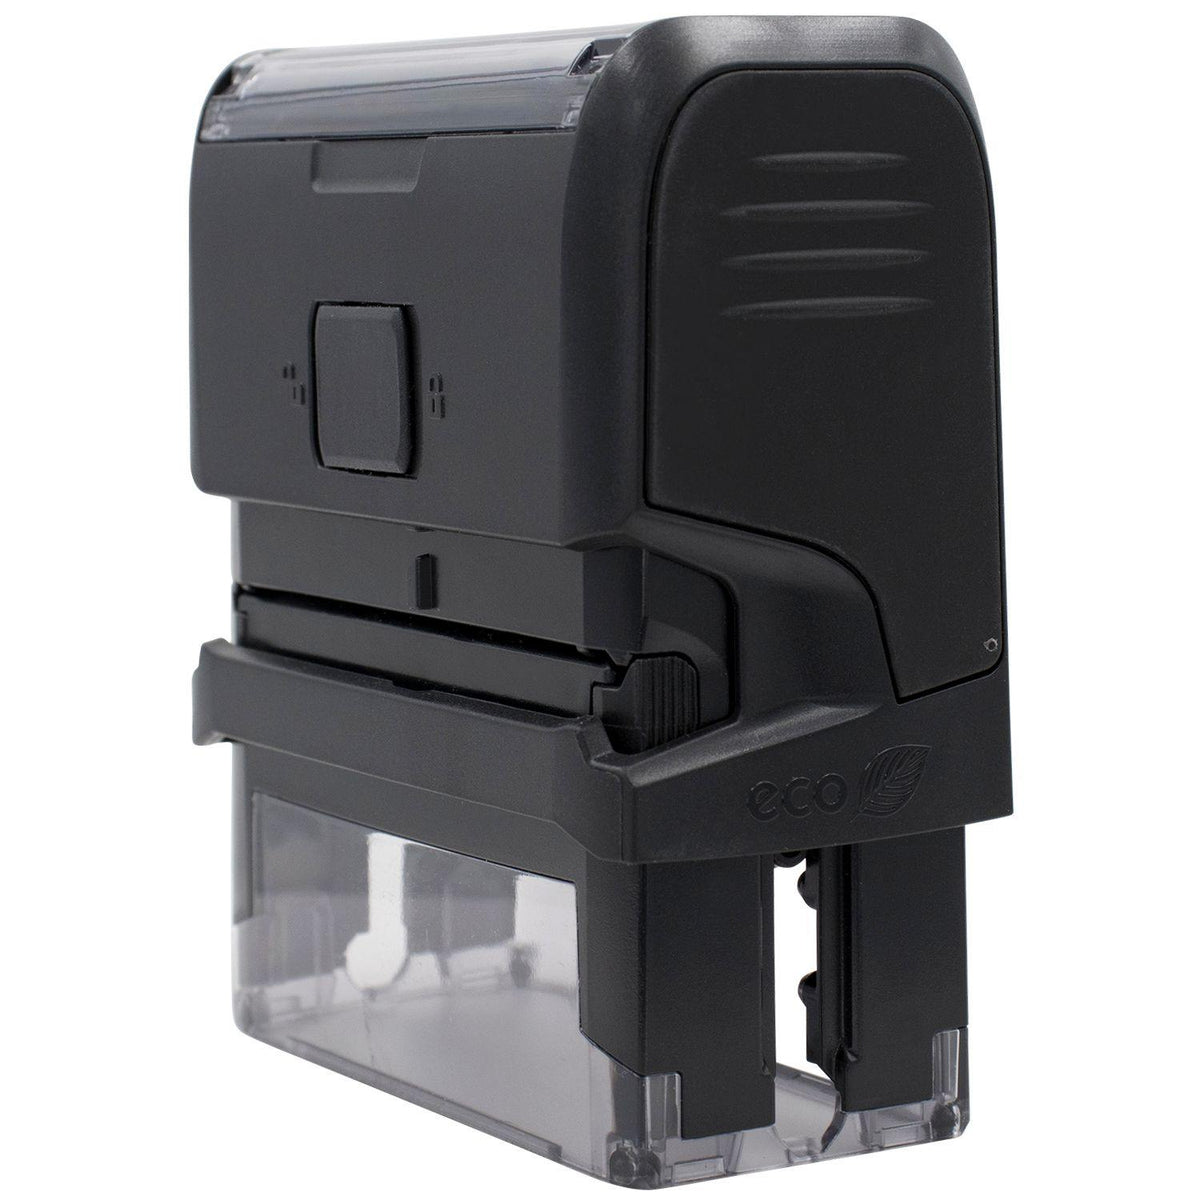 Self-Inking Confirmation Stamp - Engineer Seal Stamps - Brand_Trodat, Impression Size_Small, Stamp Type_Self-Inking Stamp, Type of Use_Office